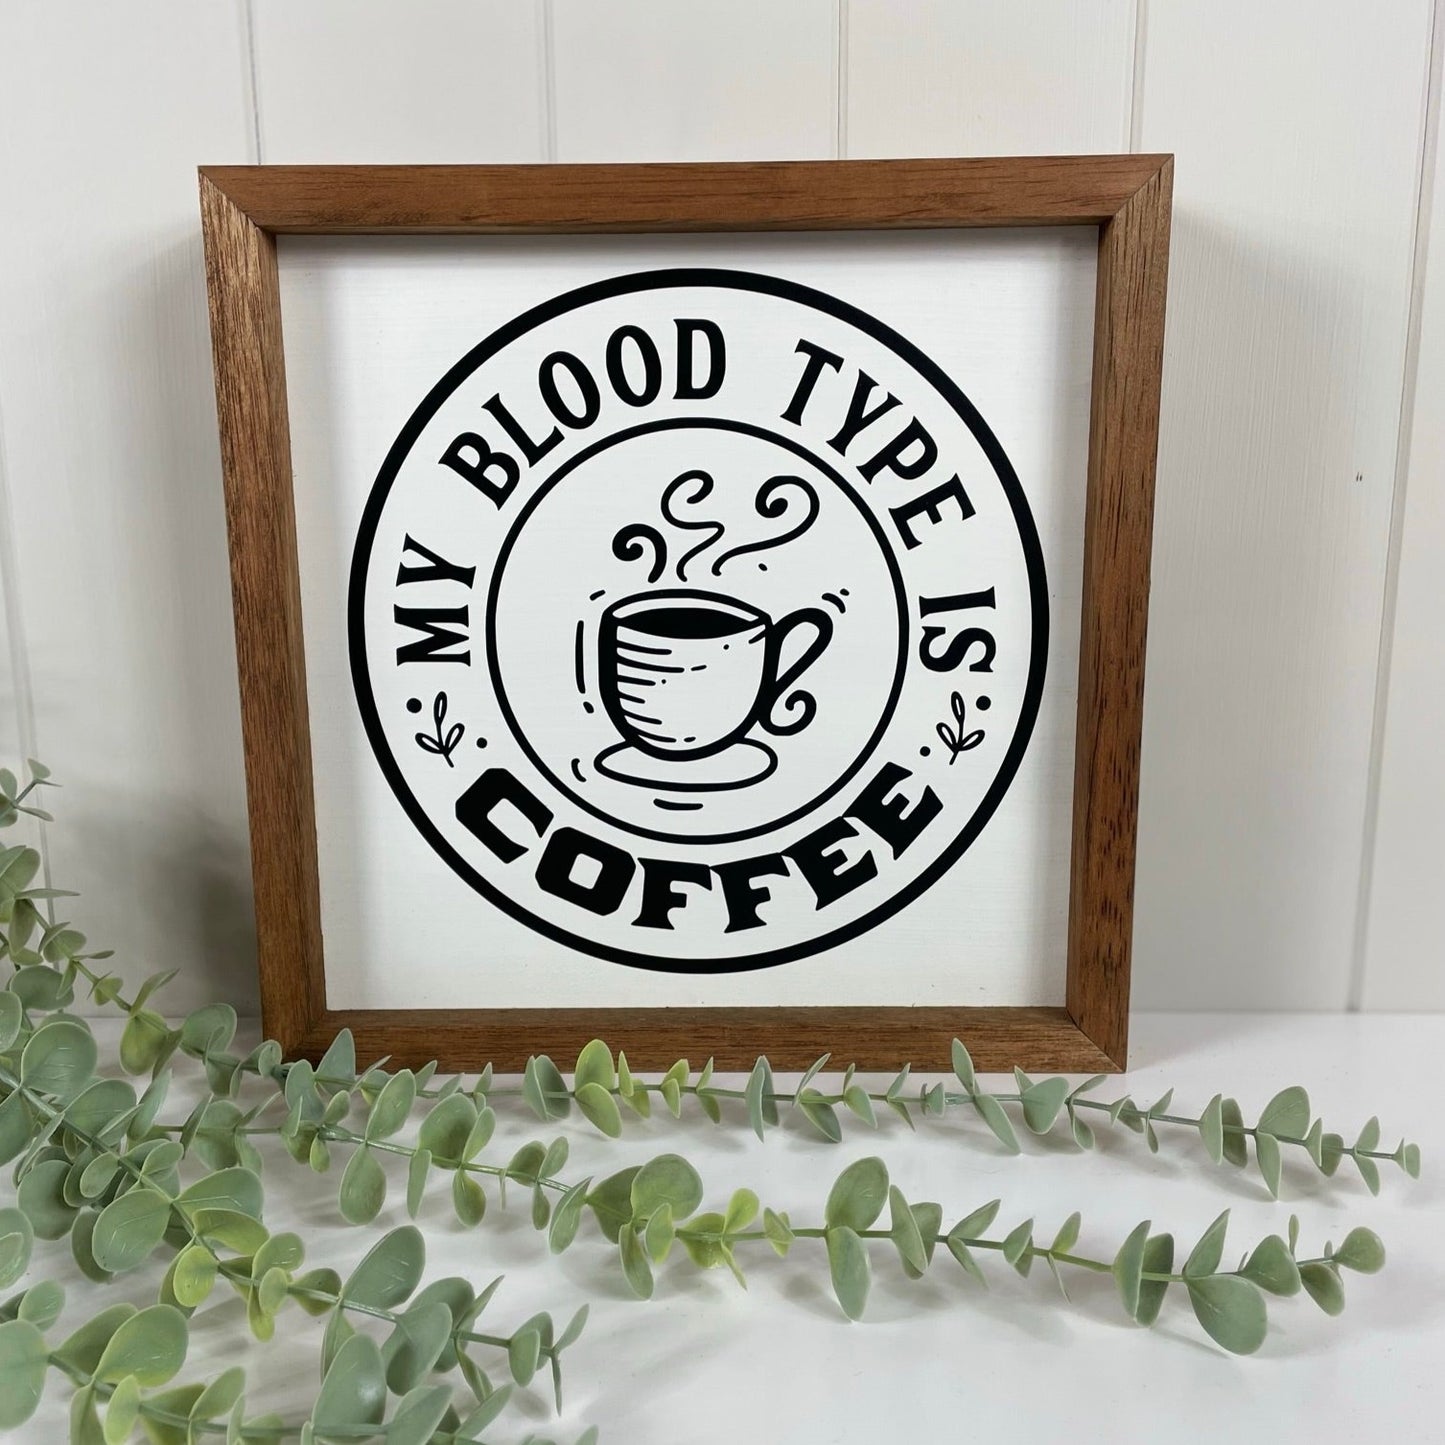 Coffee is my Blood Type